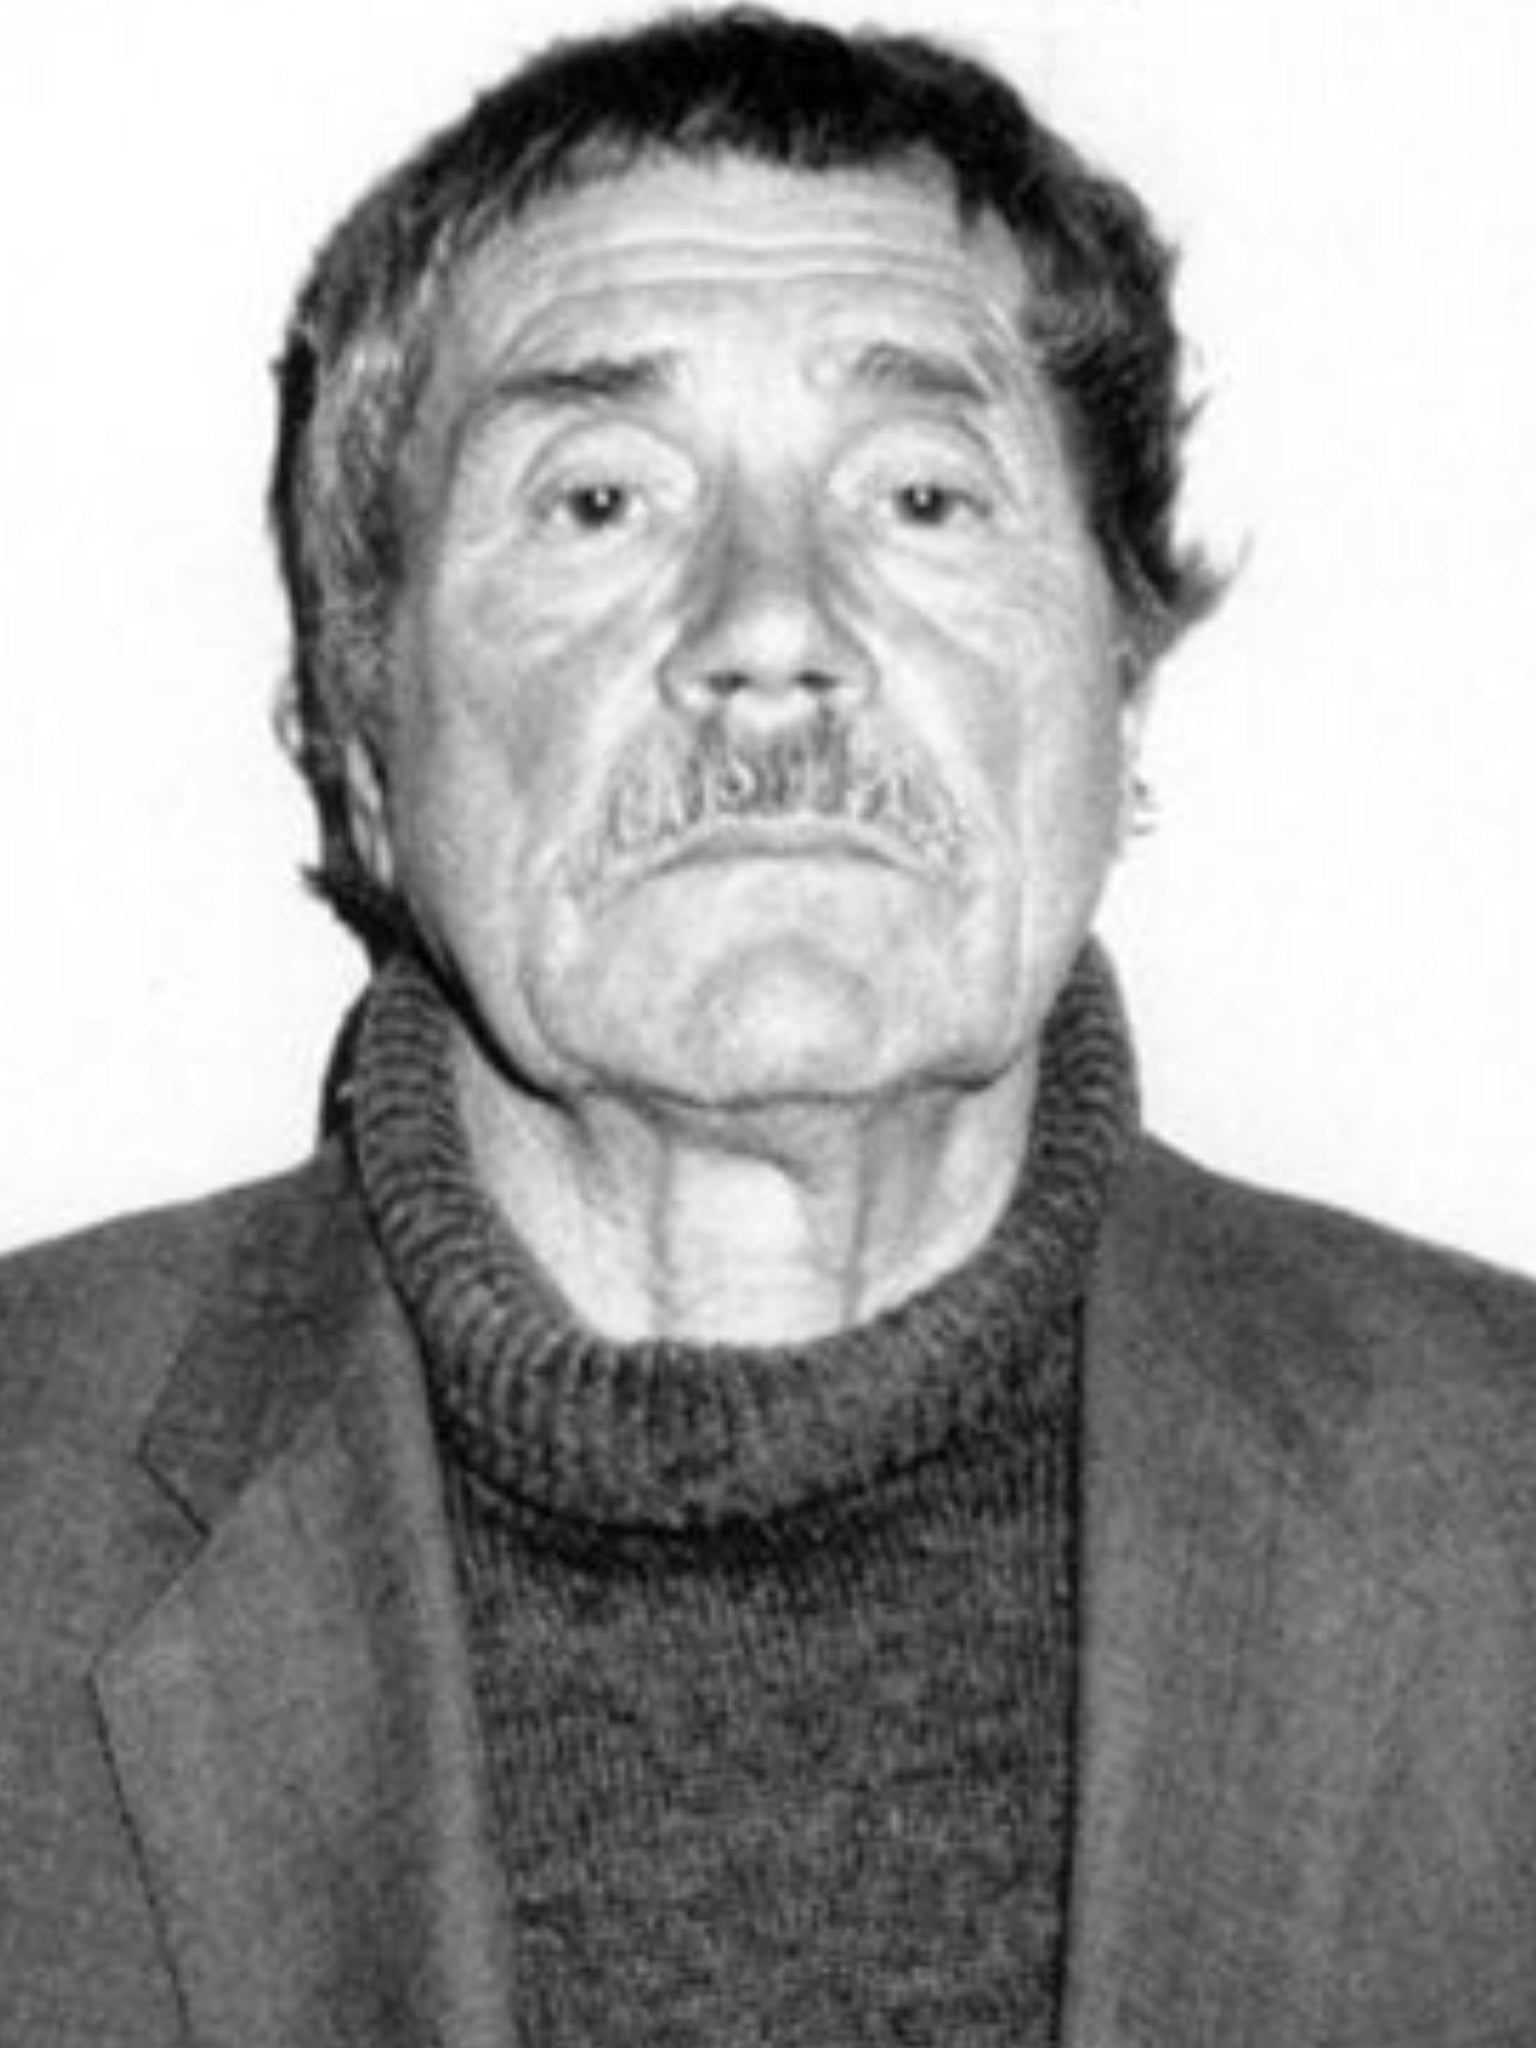 The former KGB officer Vasili Mitrokhin as he looked the day he defected to the West